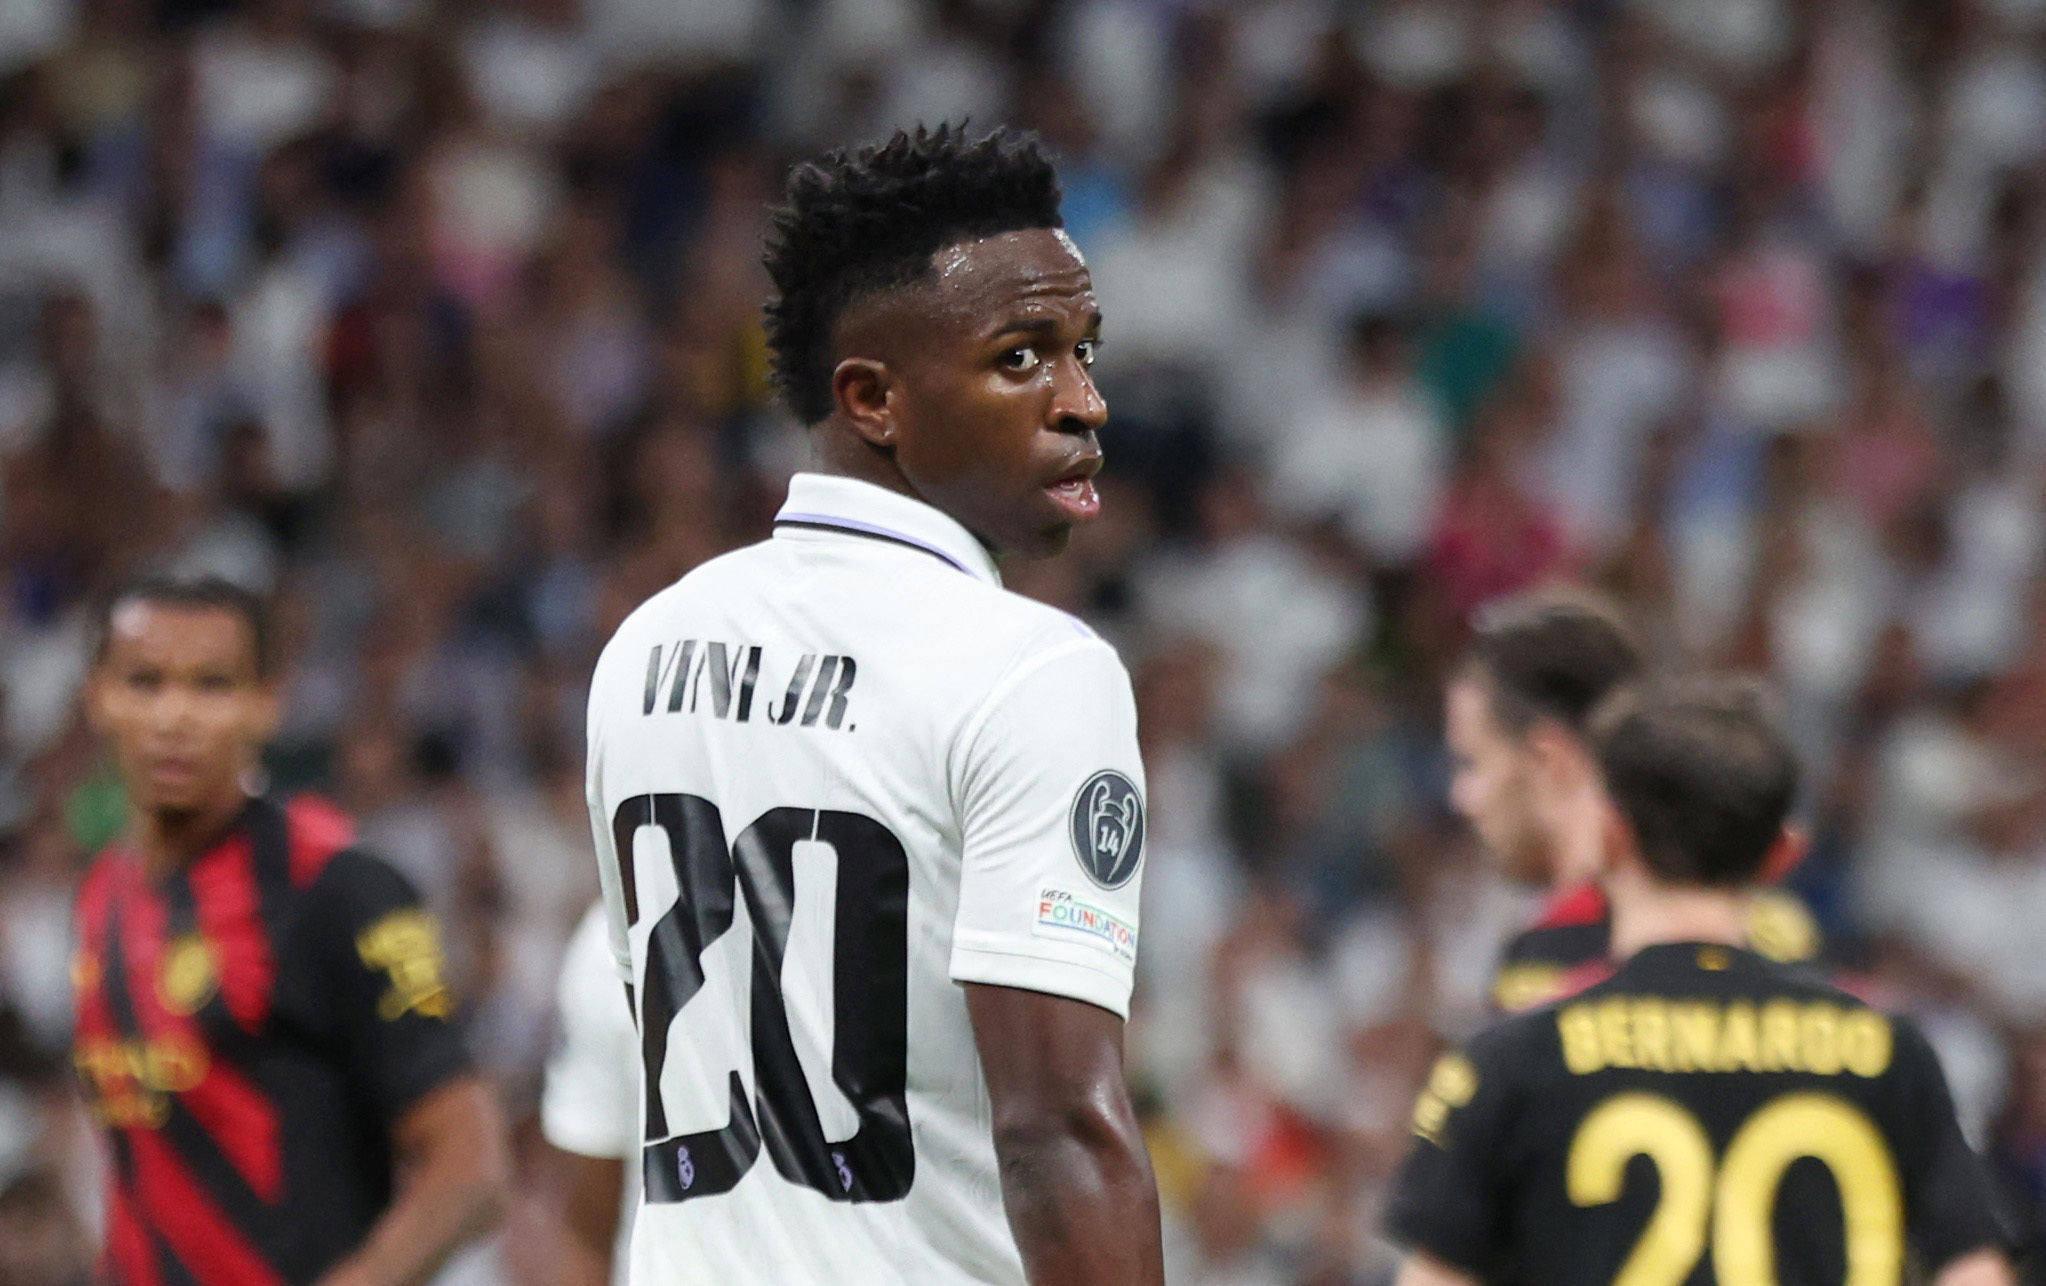 La Liga: Vinicius Jr receives support after racism row in Real Madrid's  match against Valencia